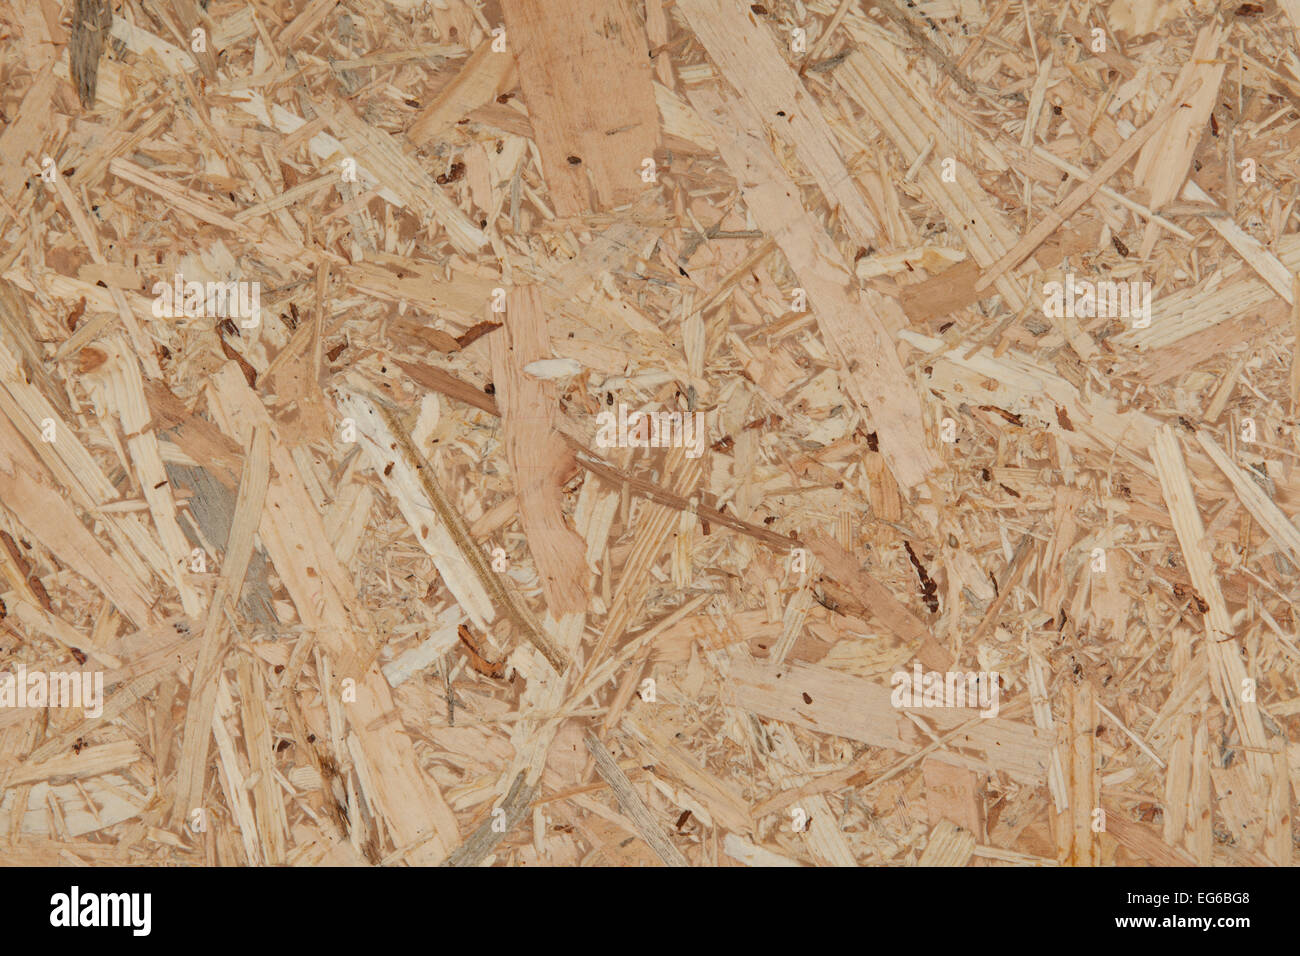 texsture of plywood close up Stock Photo